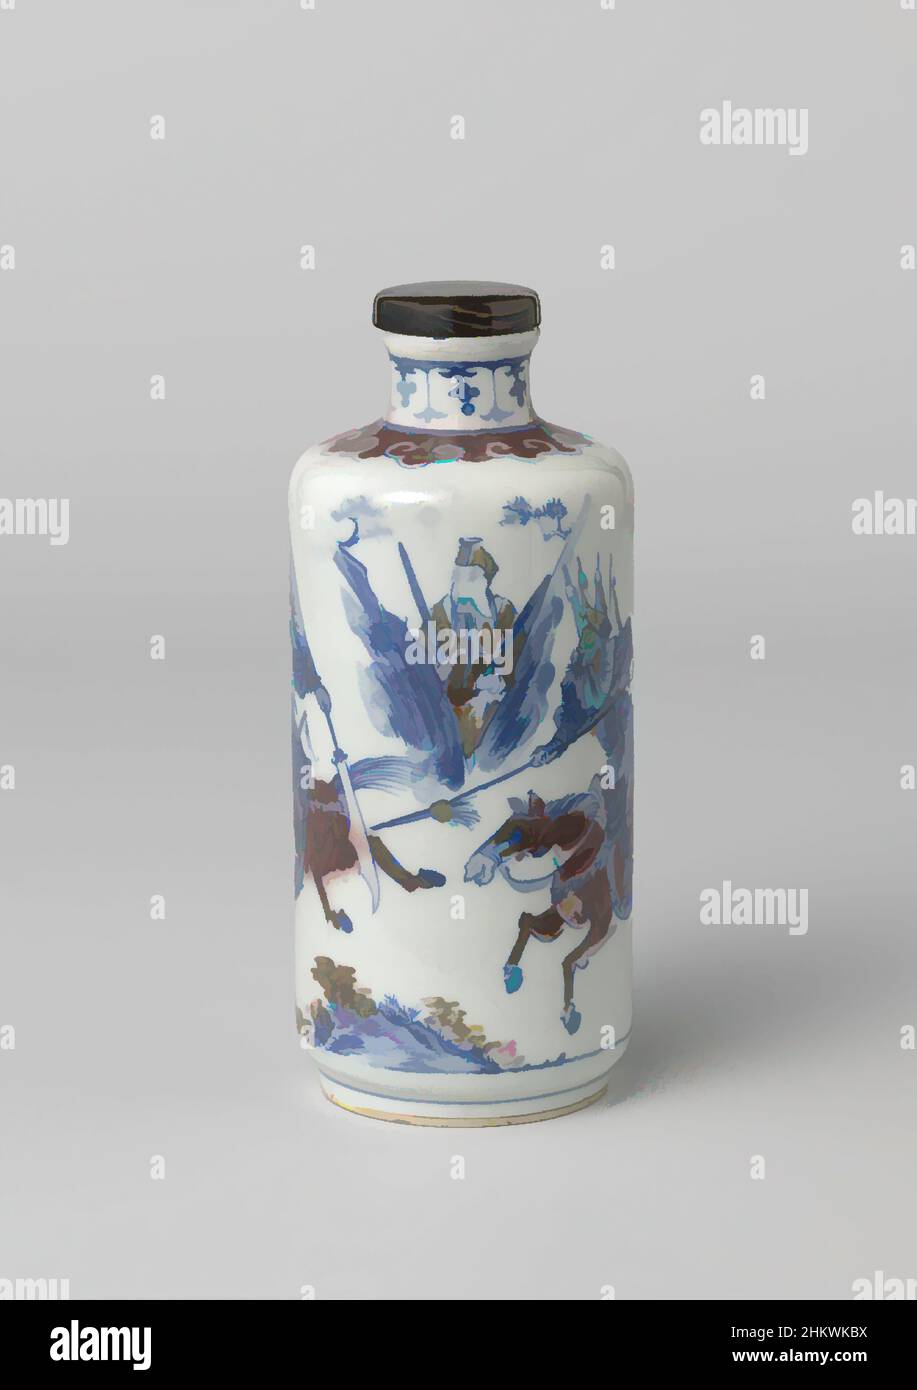 Art inspired by Cylindrical bottle vase with warriors, Wooden cap of bottle-shaped vase of porcelain. A point protrudes from the bottom., China, c. 1800 - c. 1924, wood (plant material), height 1.1 cm × diameter 3.1 cm, Classic works modernized by Artotop with a splash of modernity. Shapes, color and value, eye-catching visual impact on art. Emotions through freedom of artworks in a contemporary way. A timeless message pursuing a wildly creative new direction. Artists turning to the digital medium and creating the Artotop NFT Stock Photo